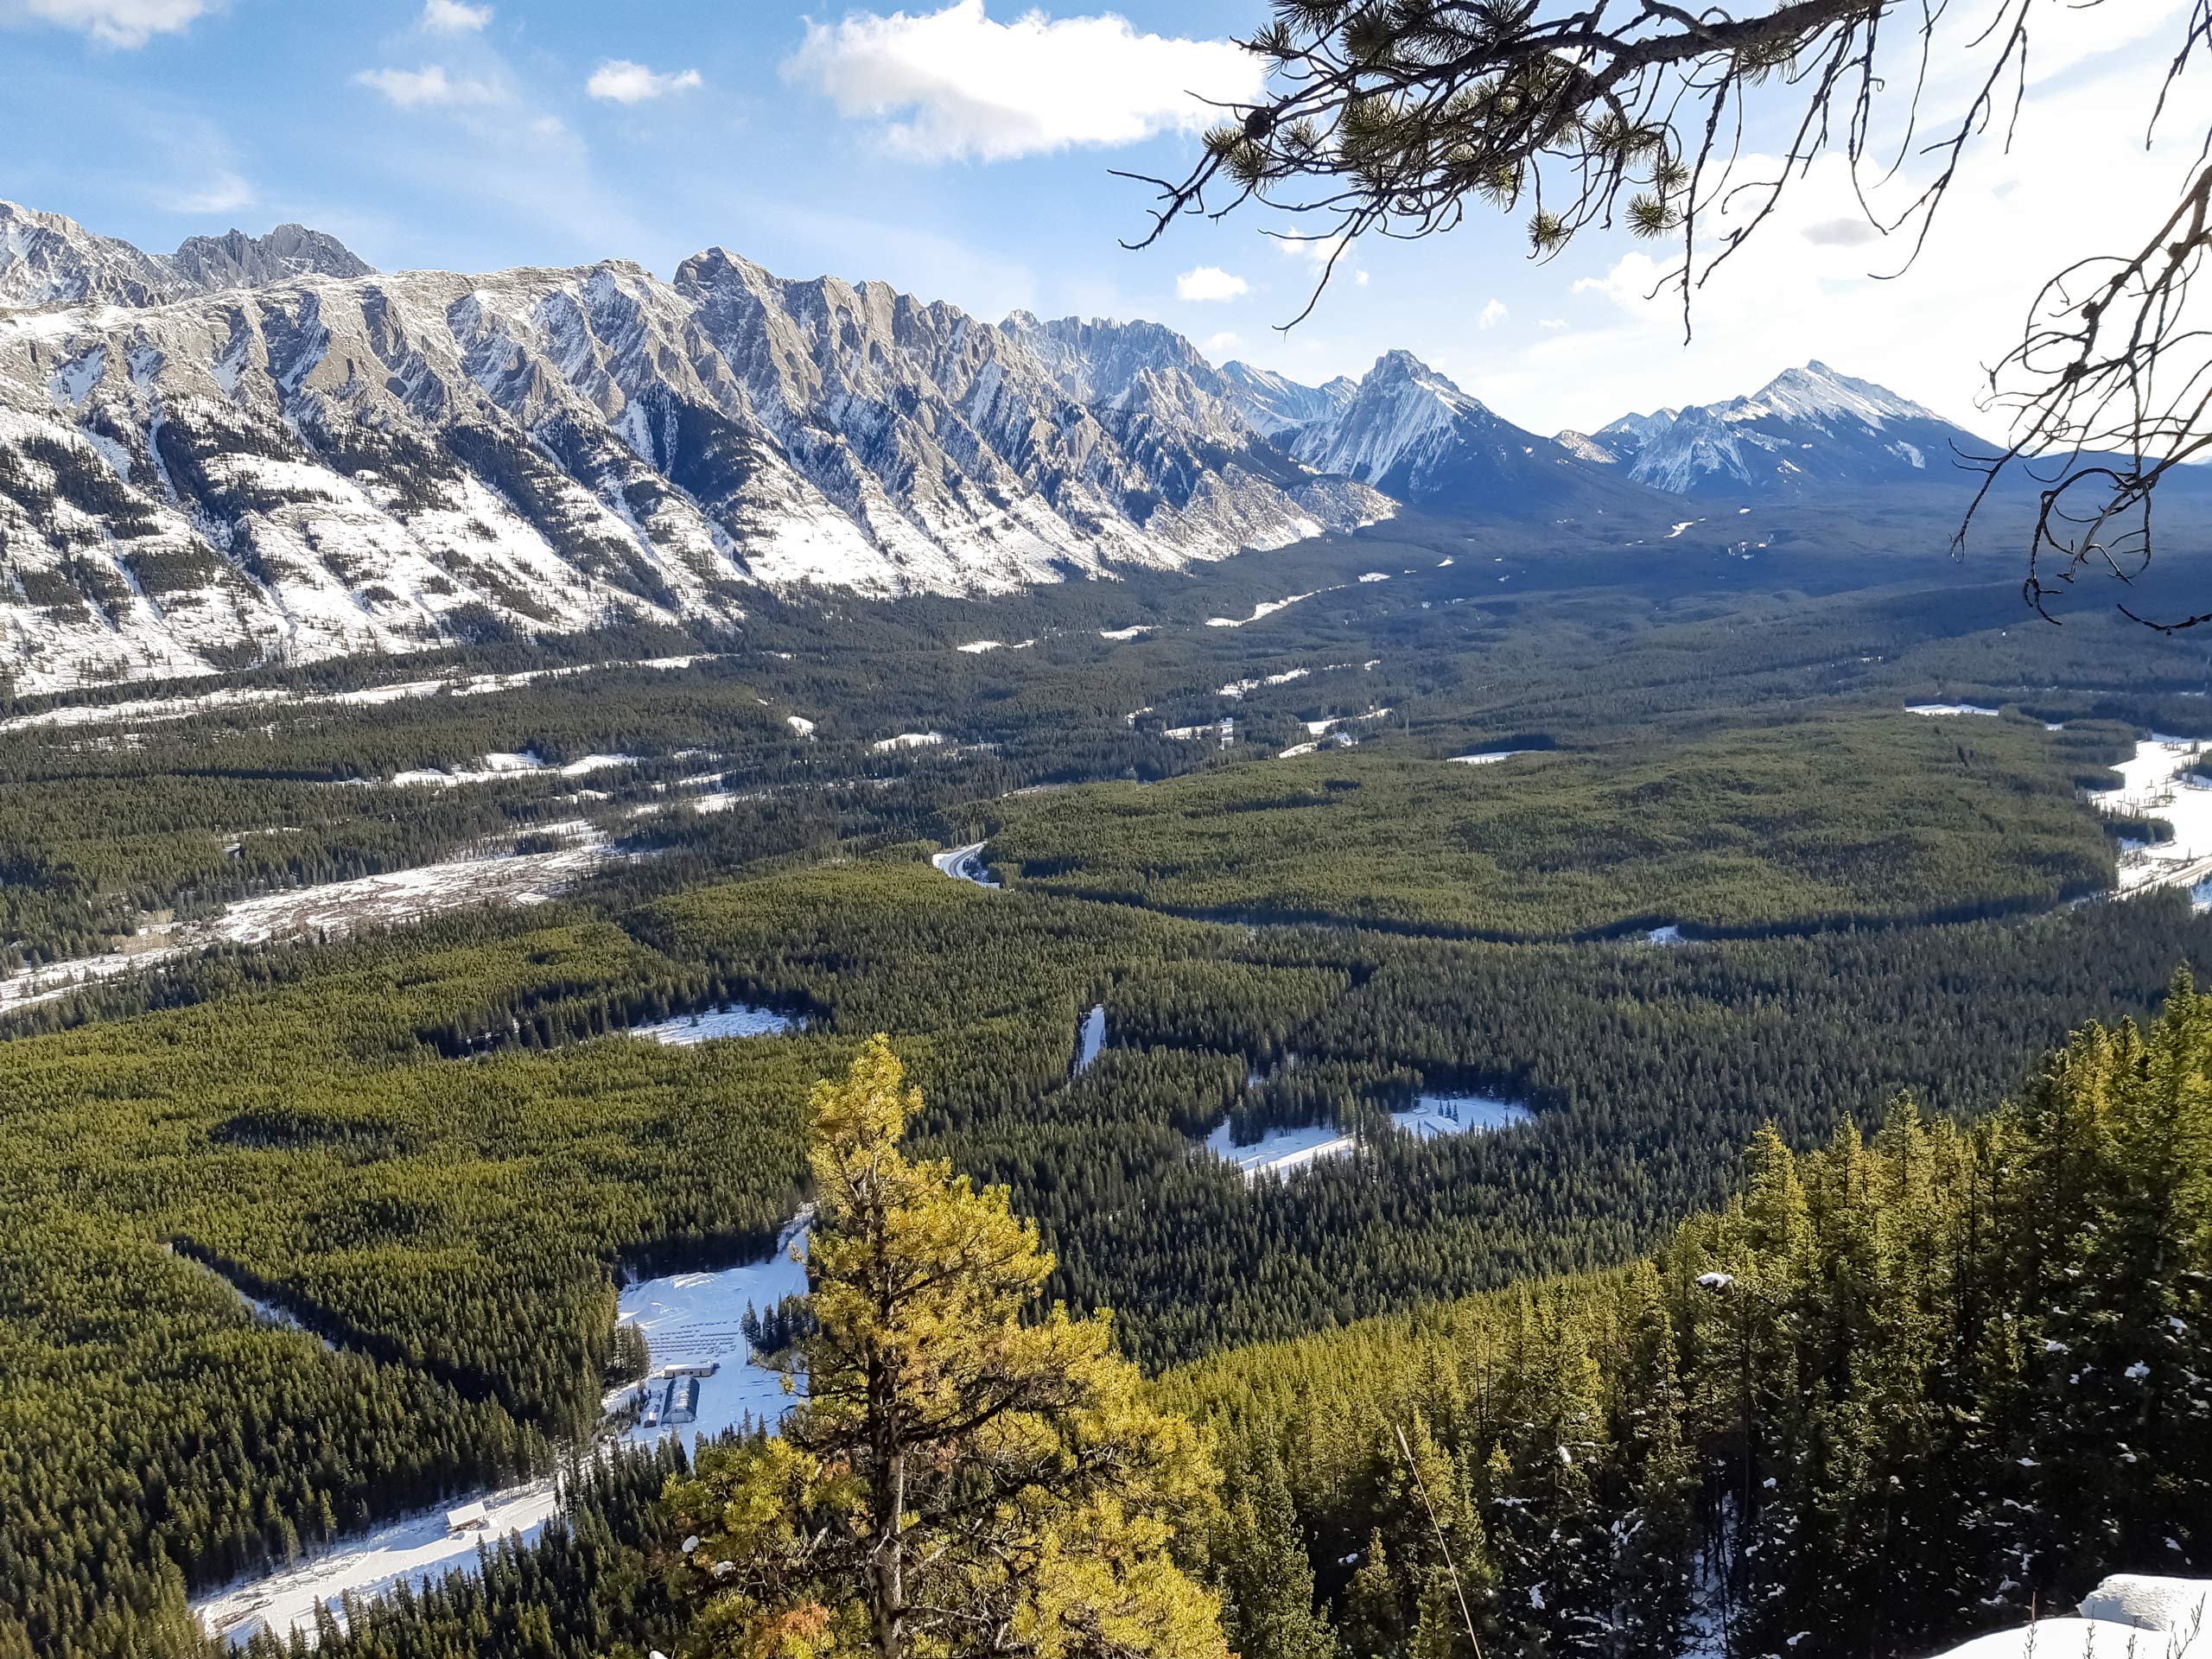 View of the rockies and river in Kananskis from Little Lawson hike